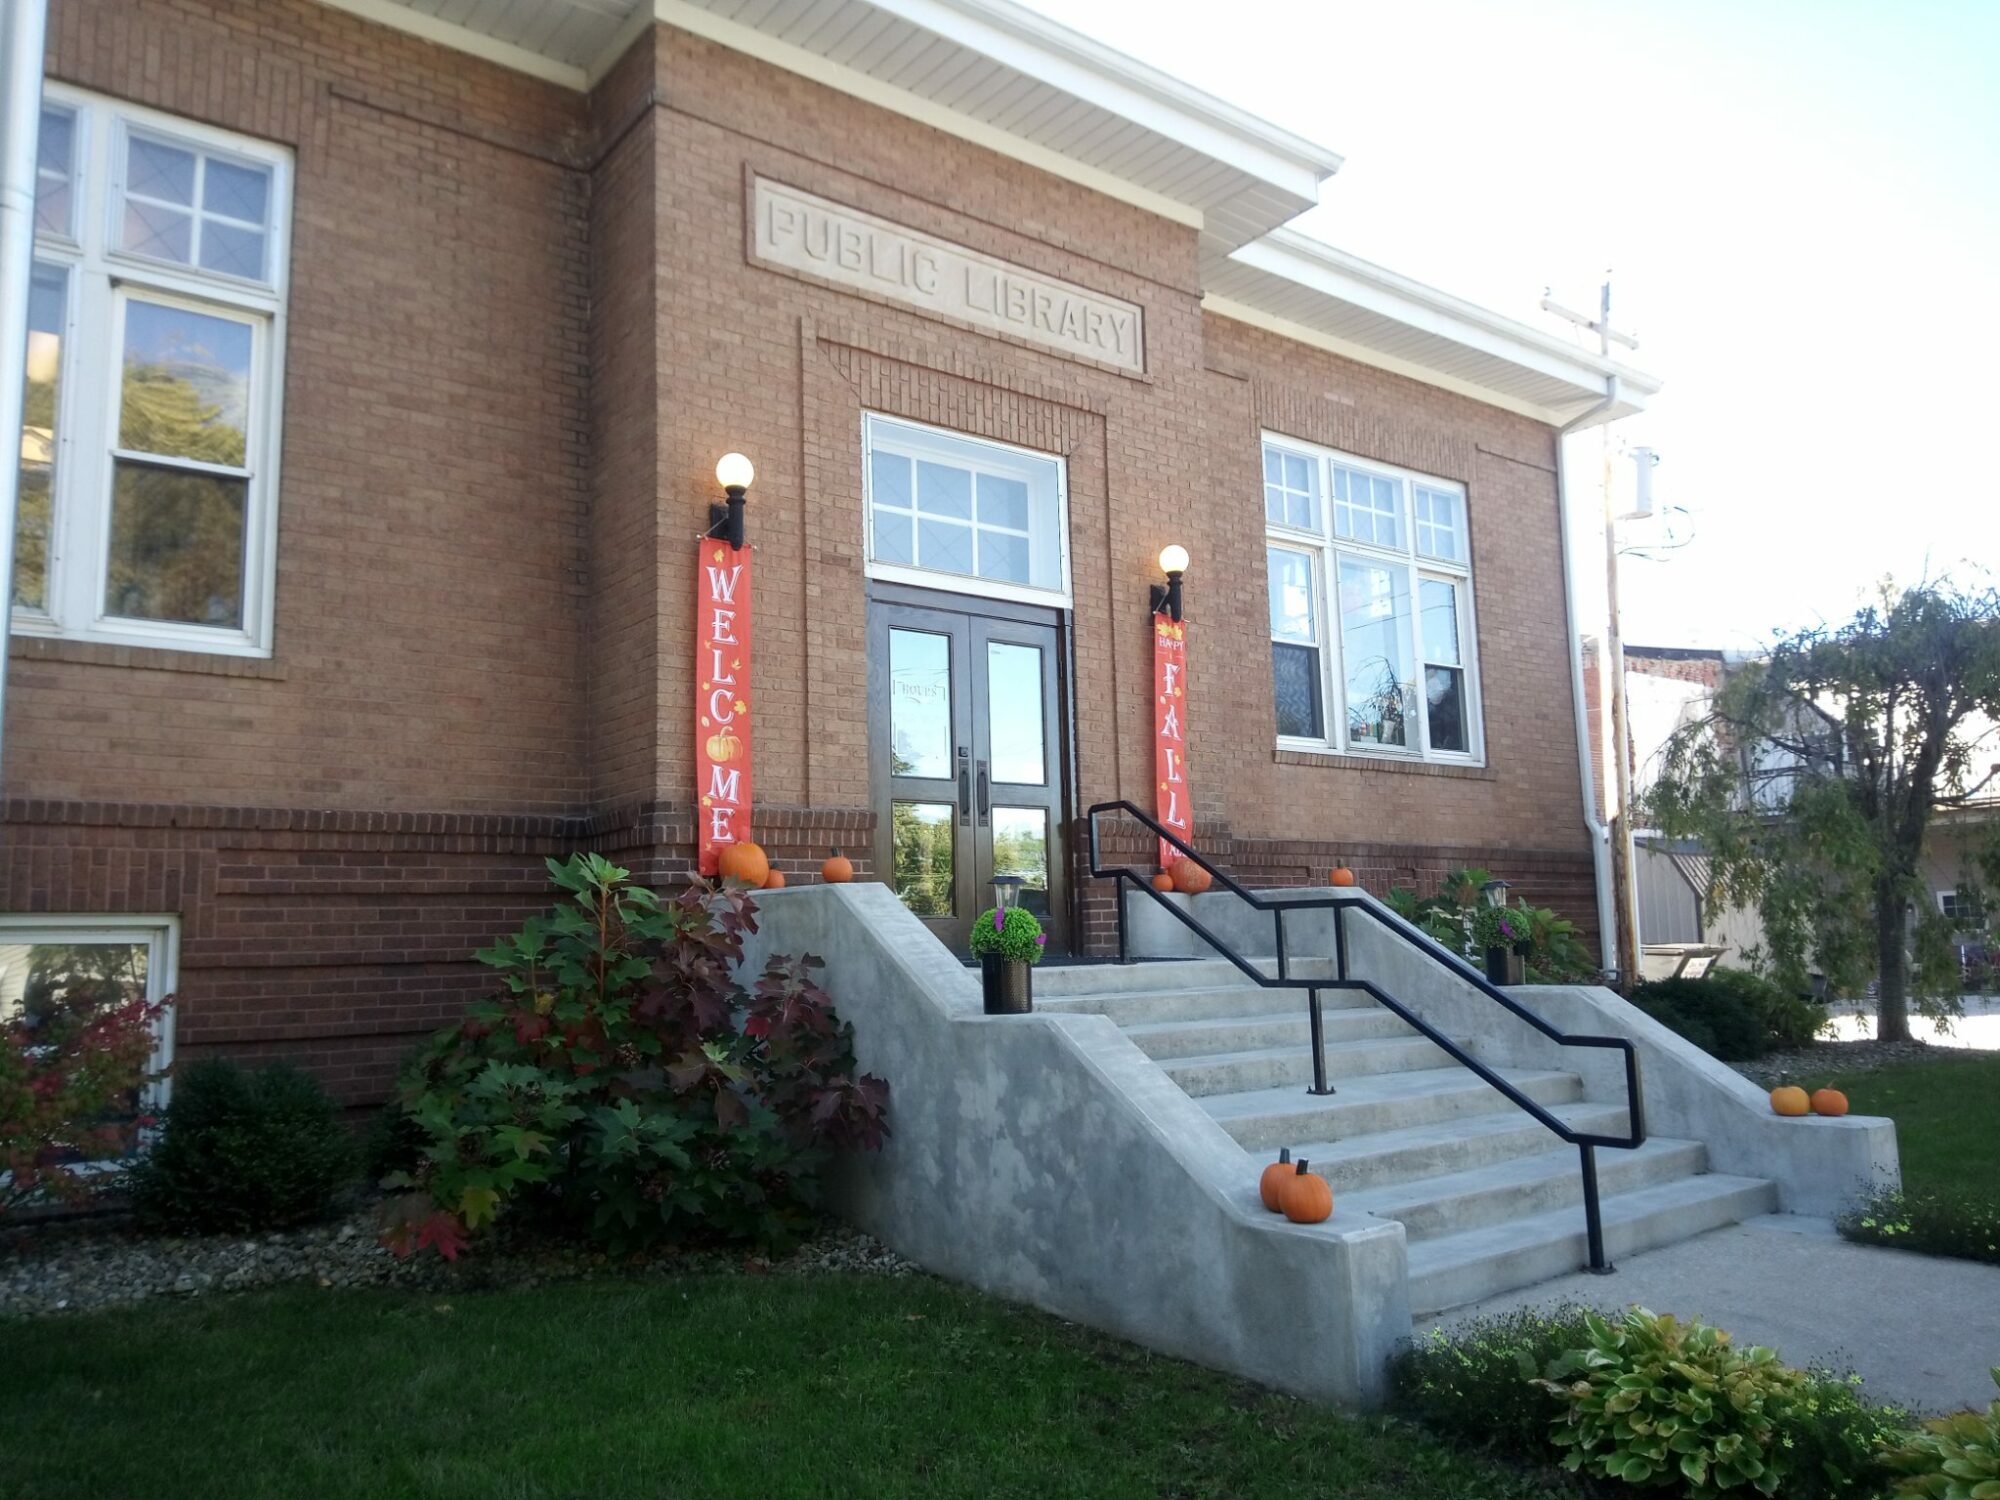 Waveland-Brown Township Public Library